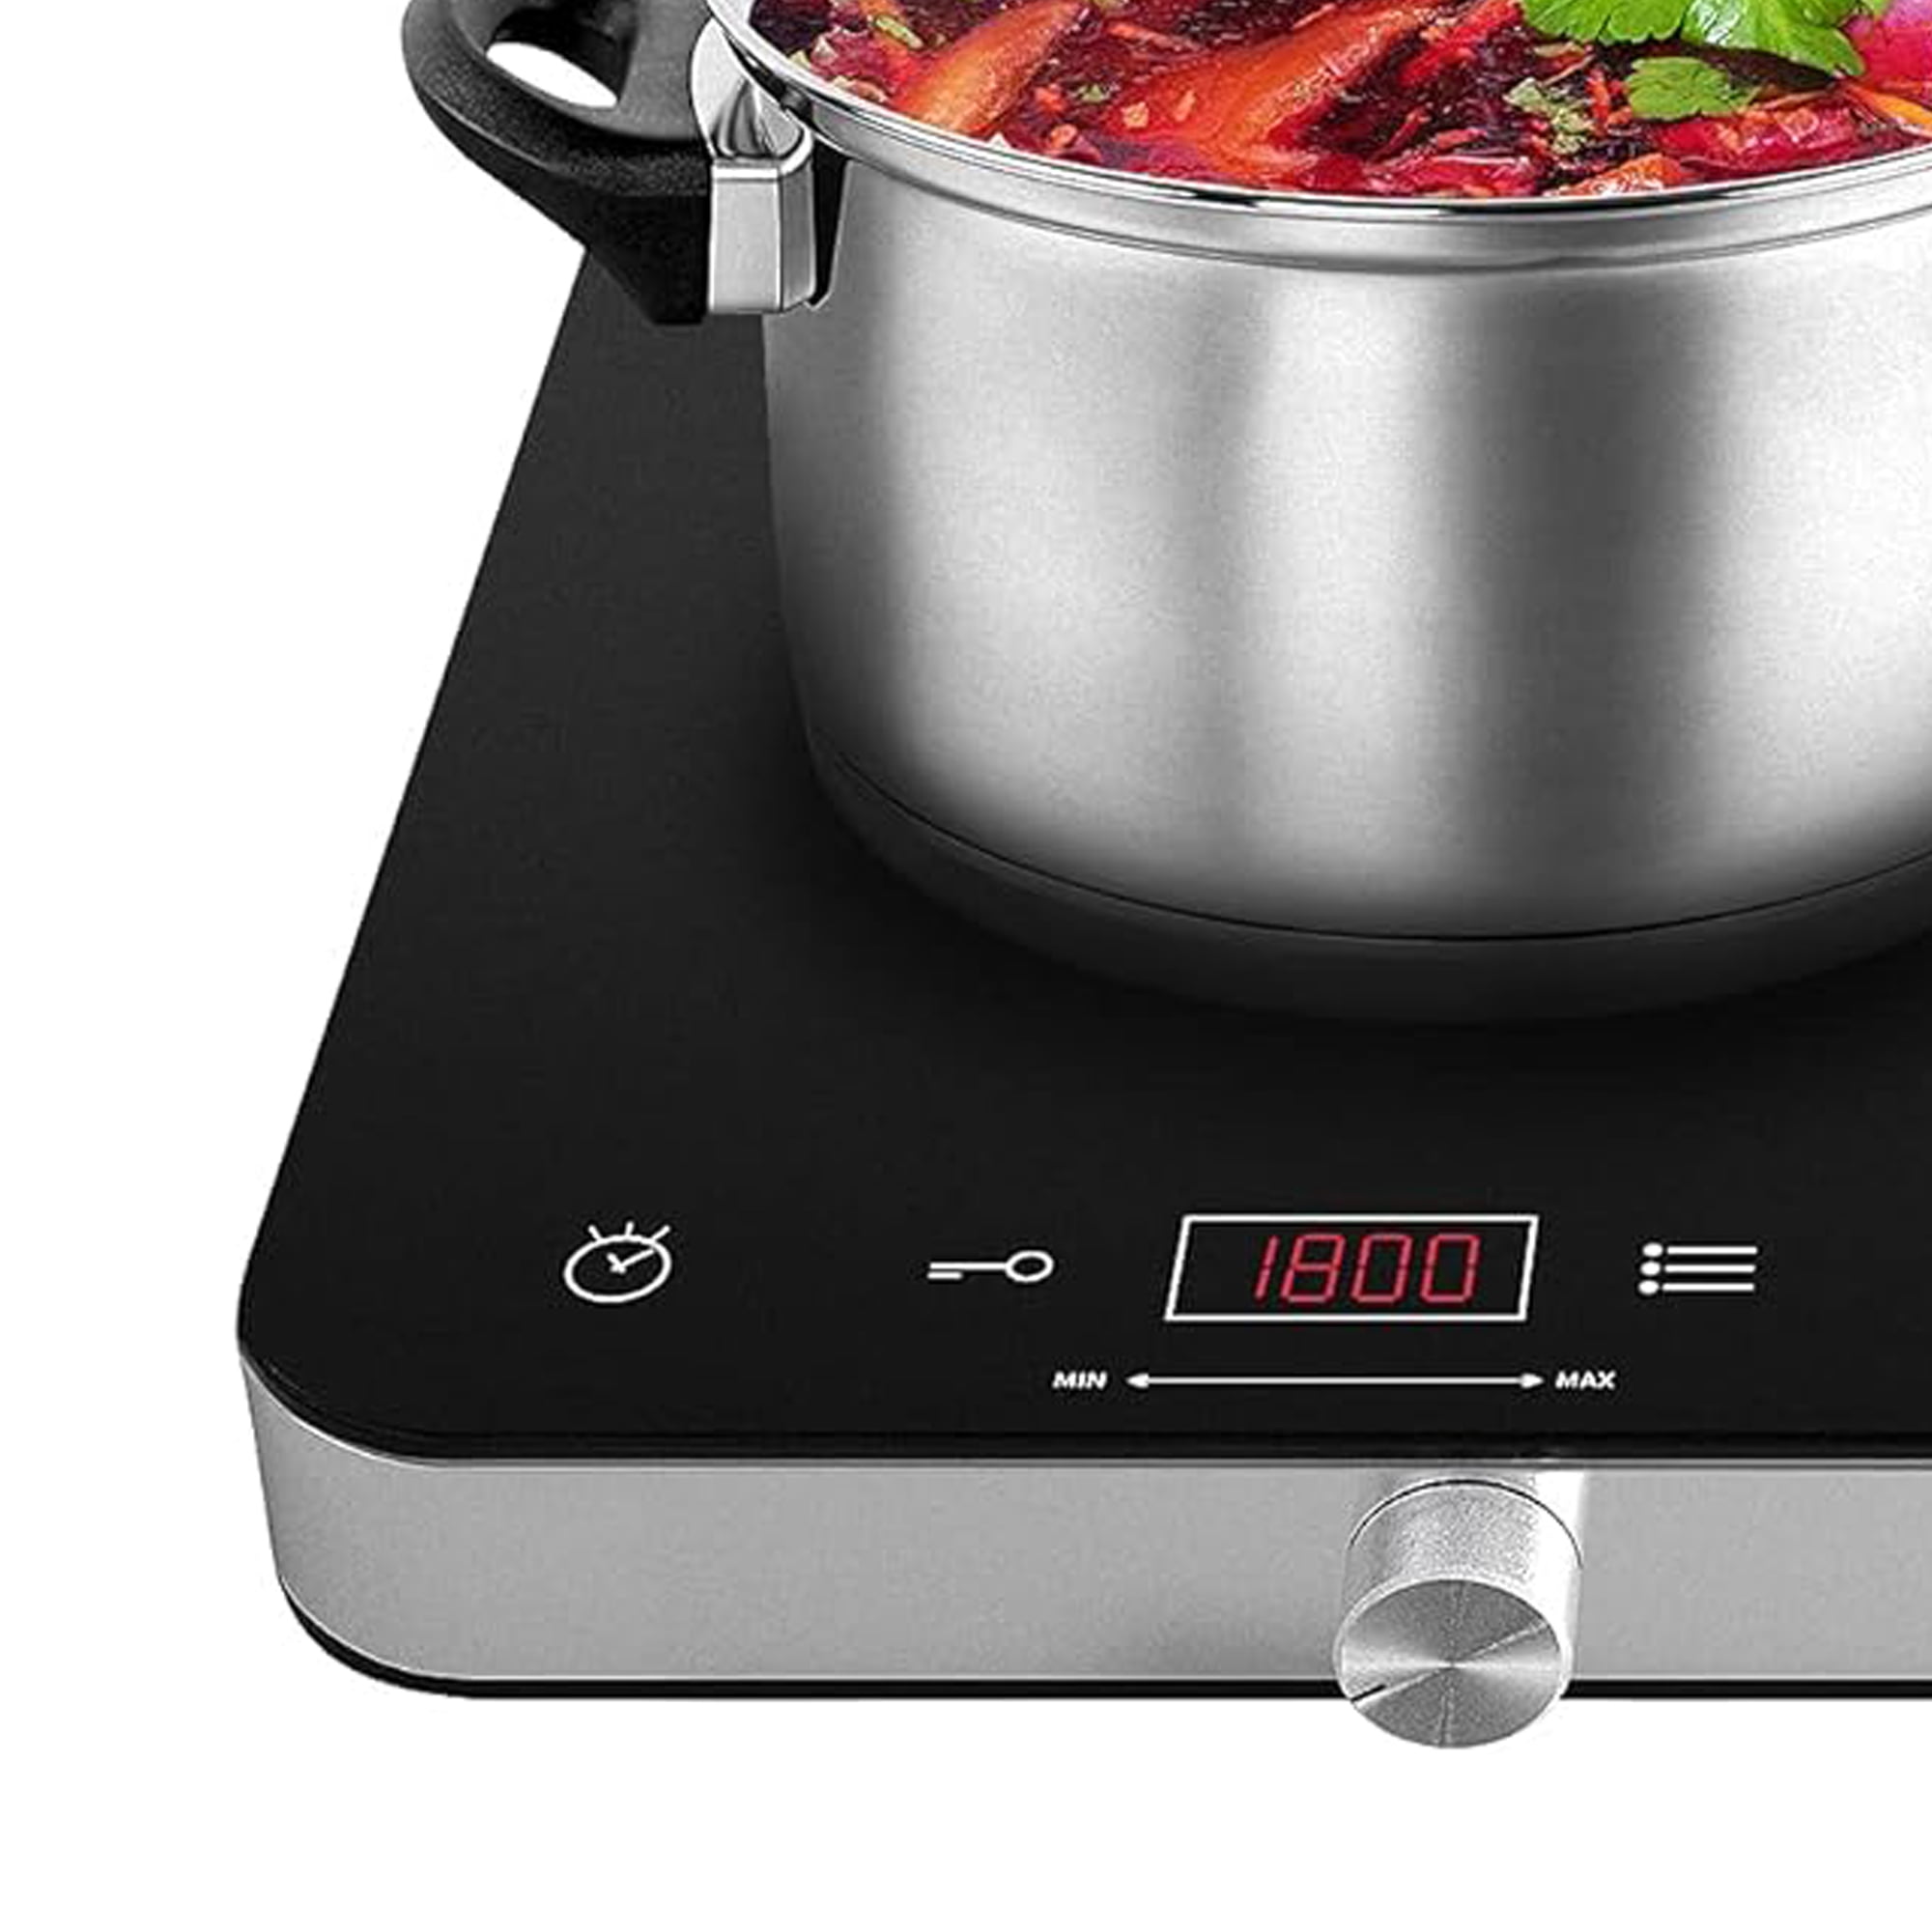 COOKTRON 1800W 120V Portable Double Burner Electric Induction